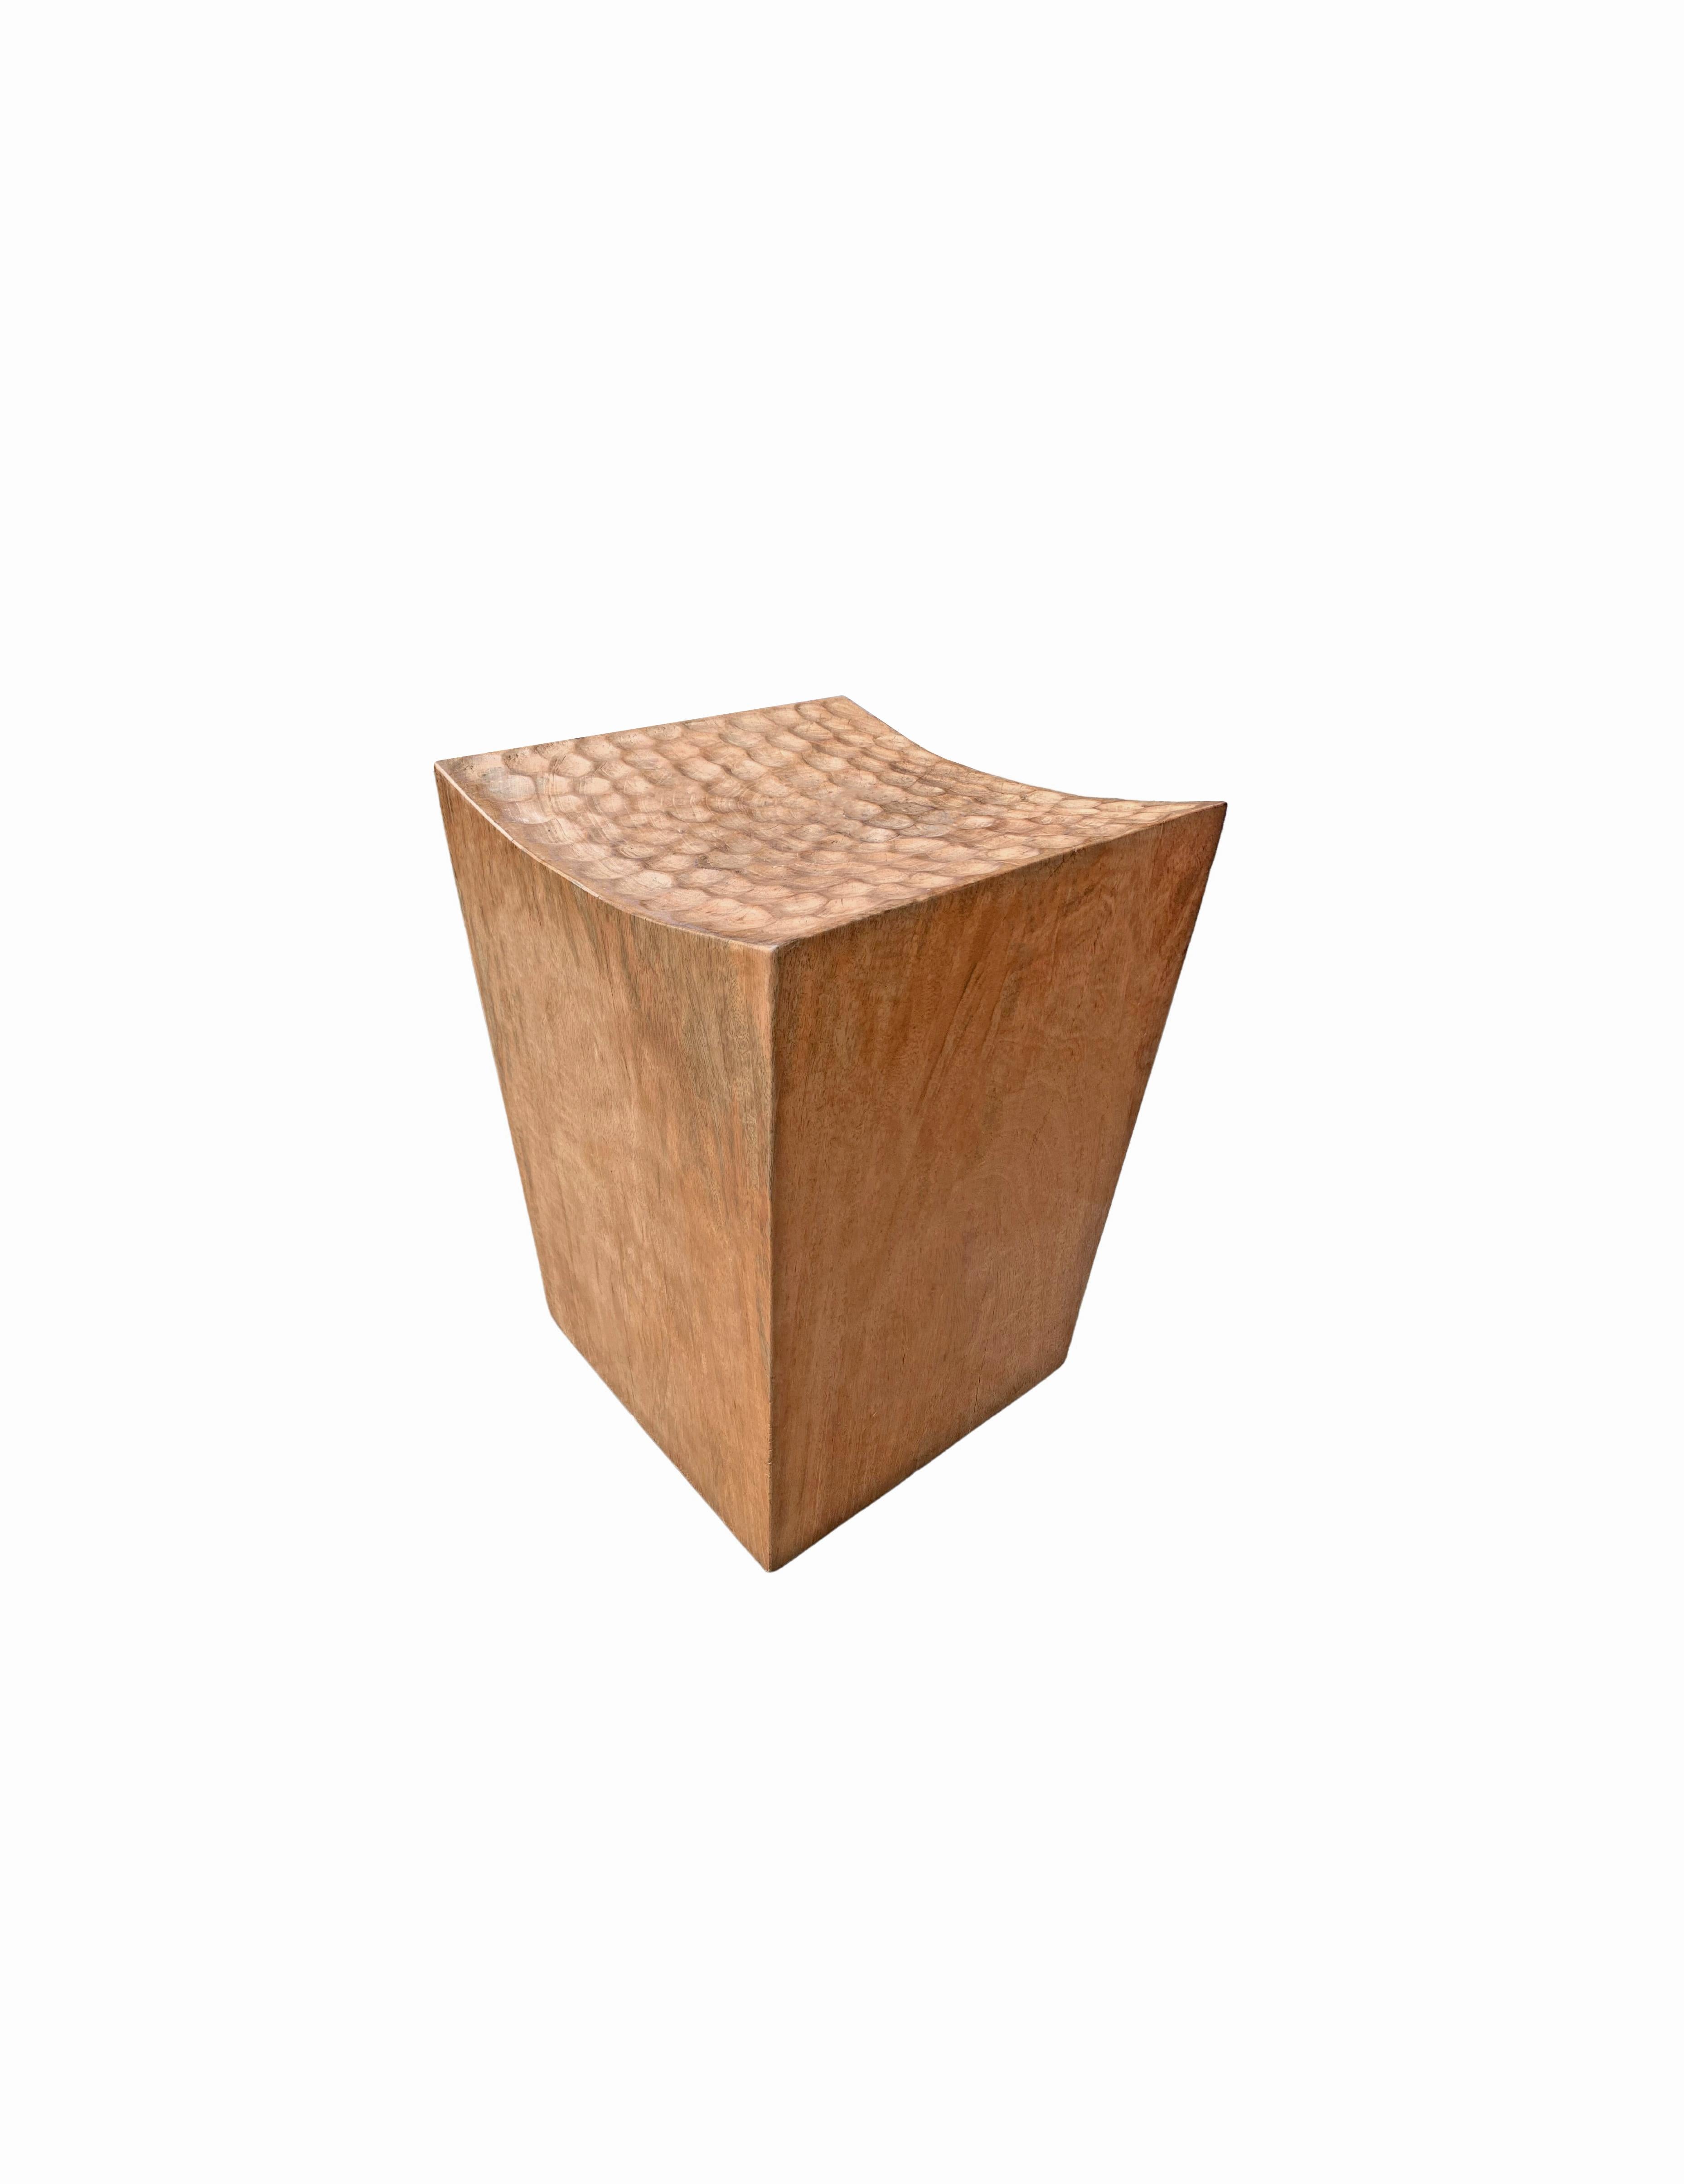 Indonesian Sculptural Stool Carved from Solid Mango Wood Modern Organic For Sale